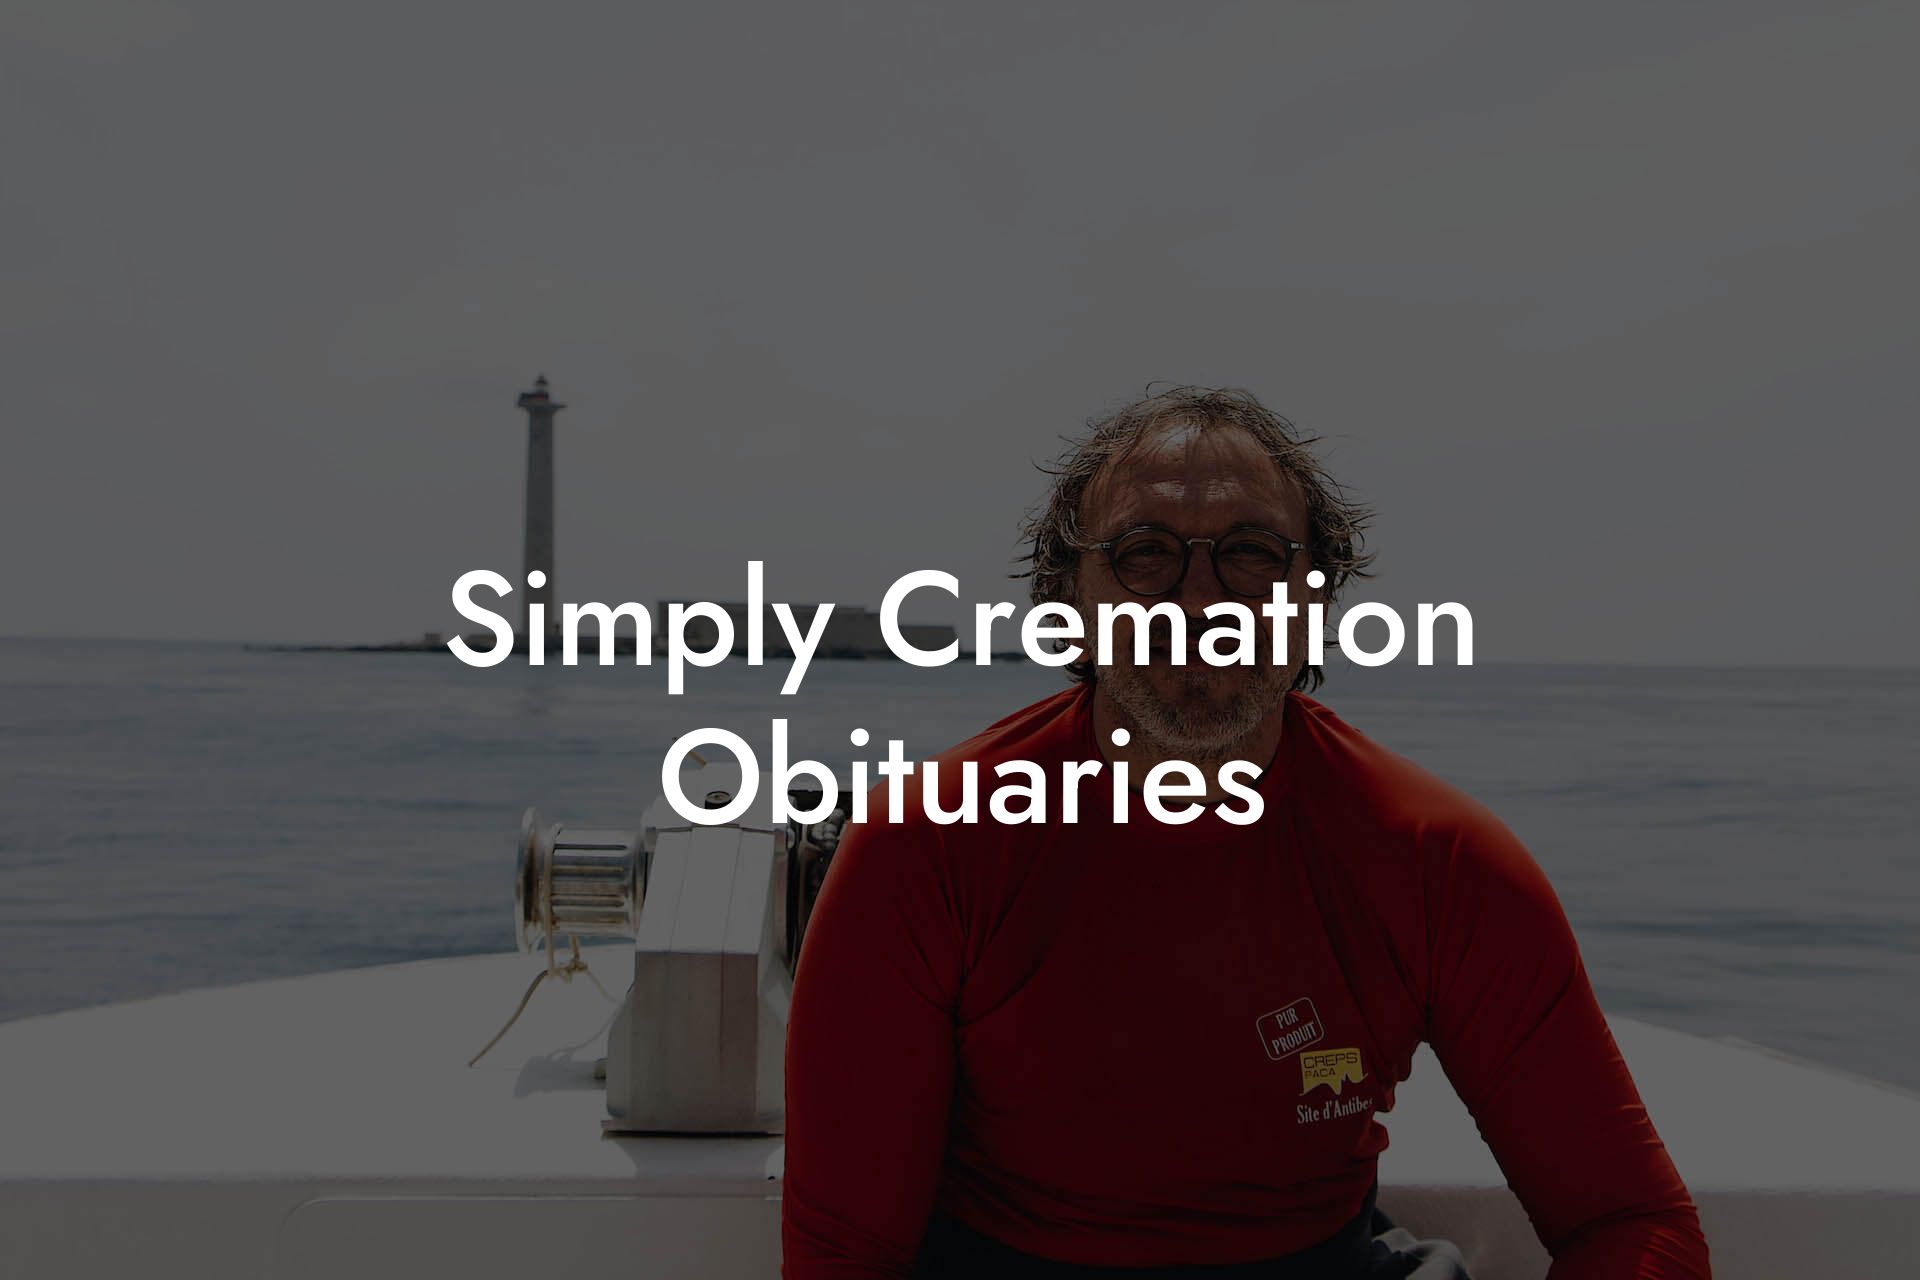 Simply Cremation Obituaries